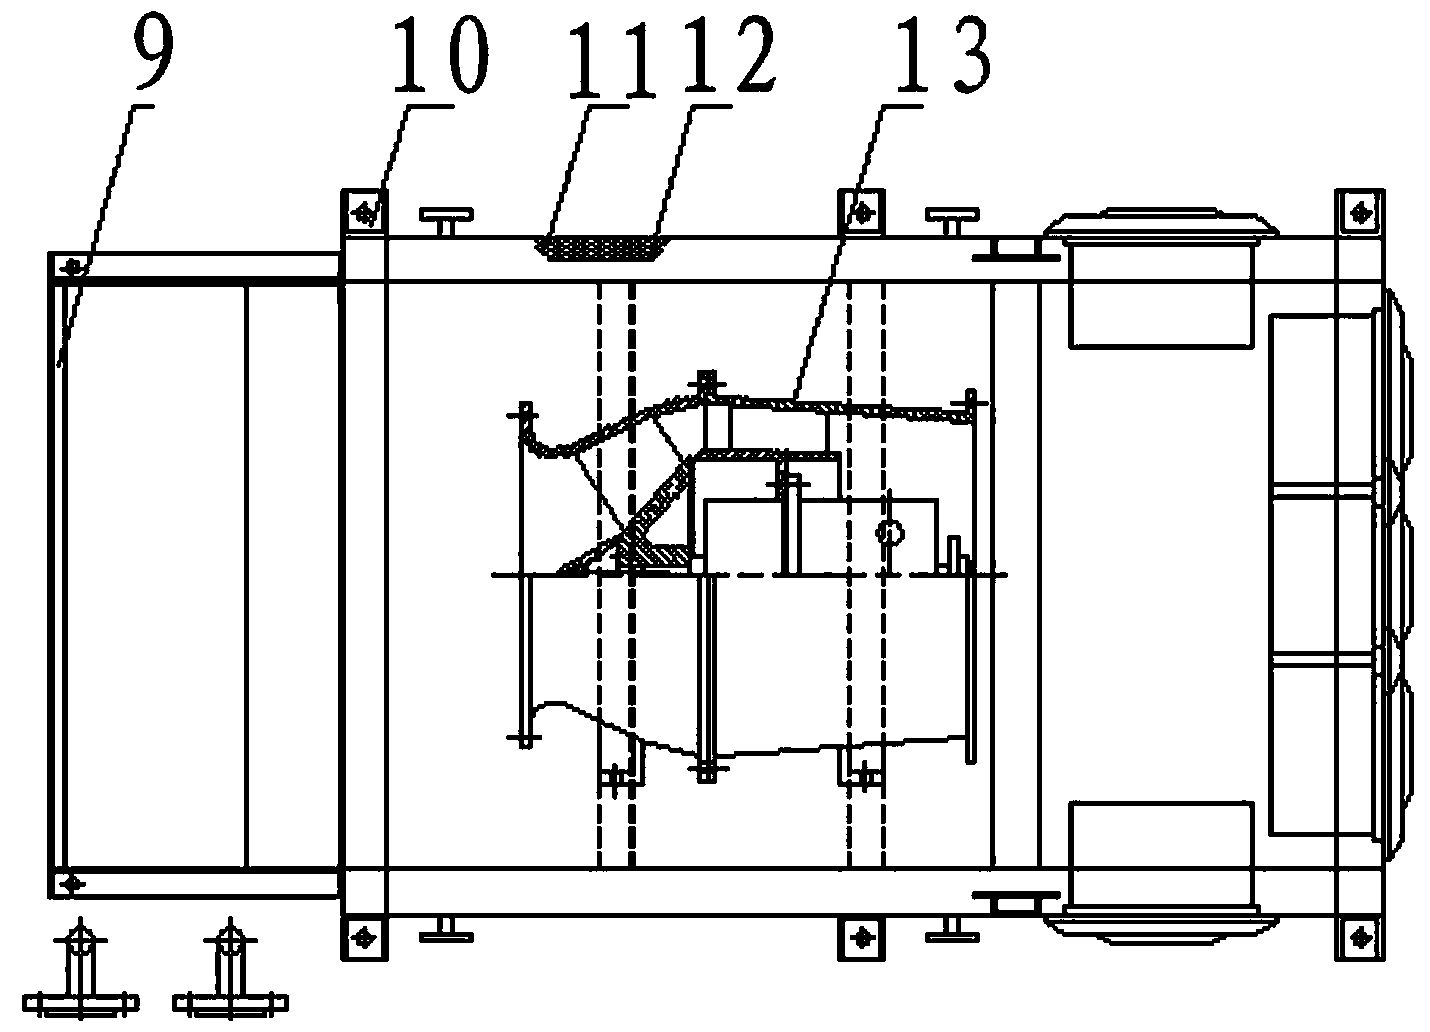 Marine jet flow induced draught cooling device